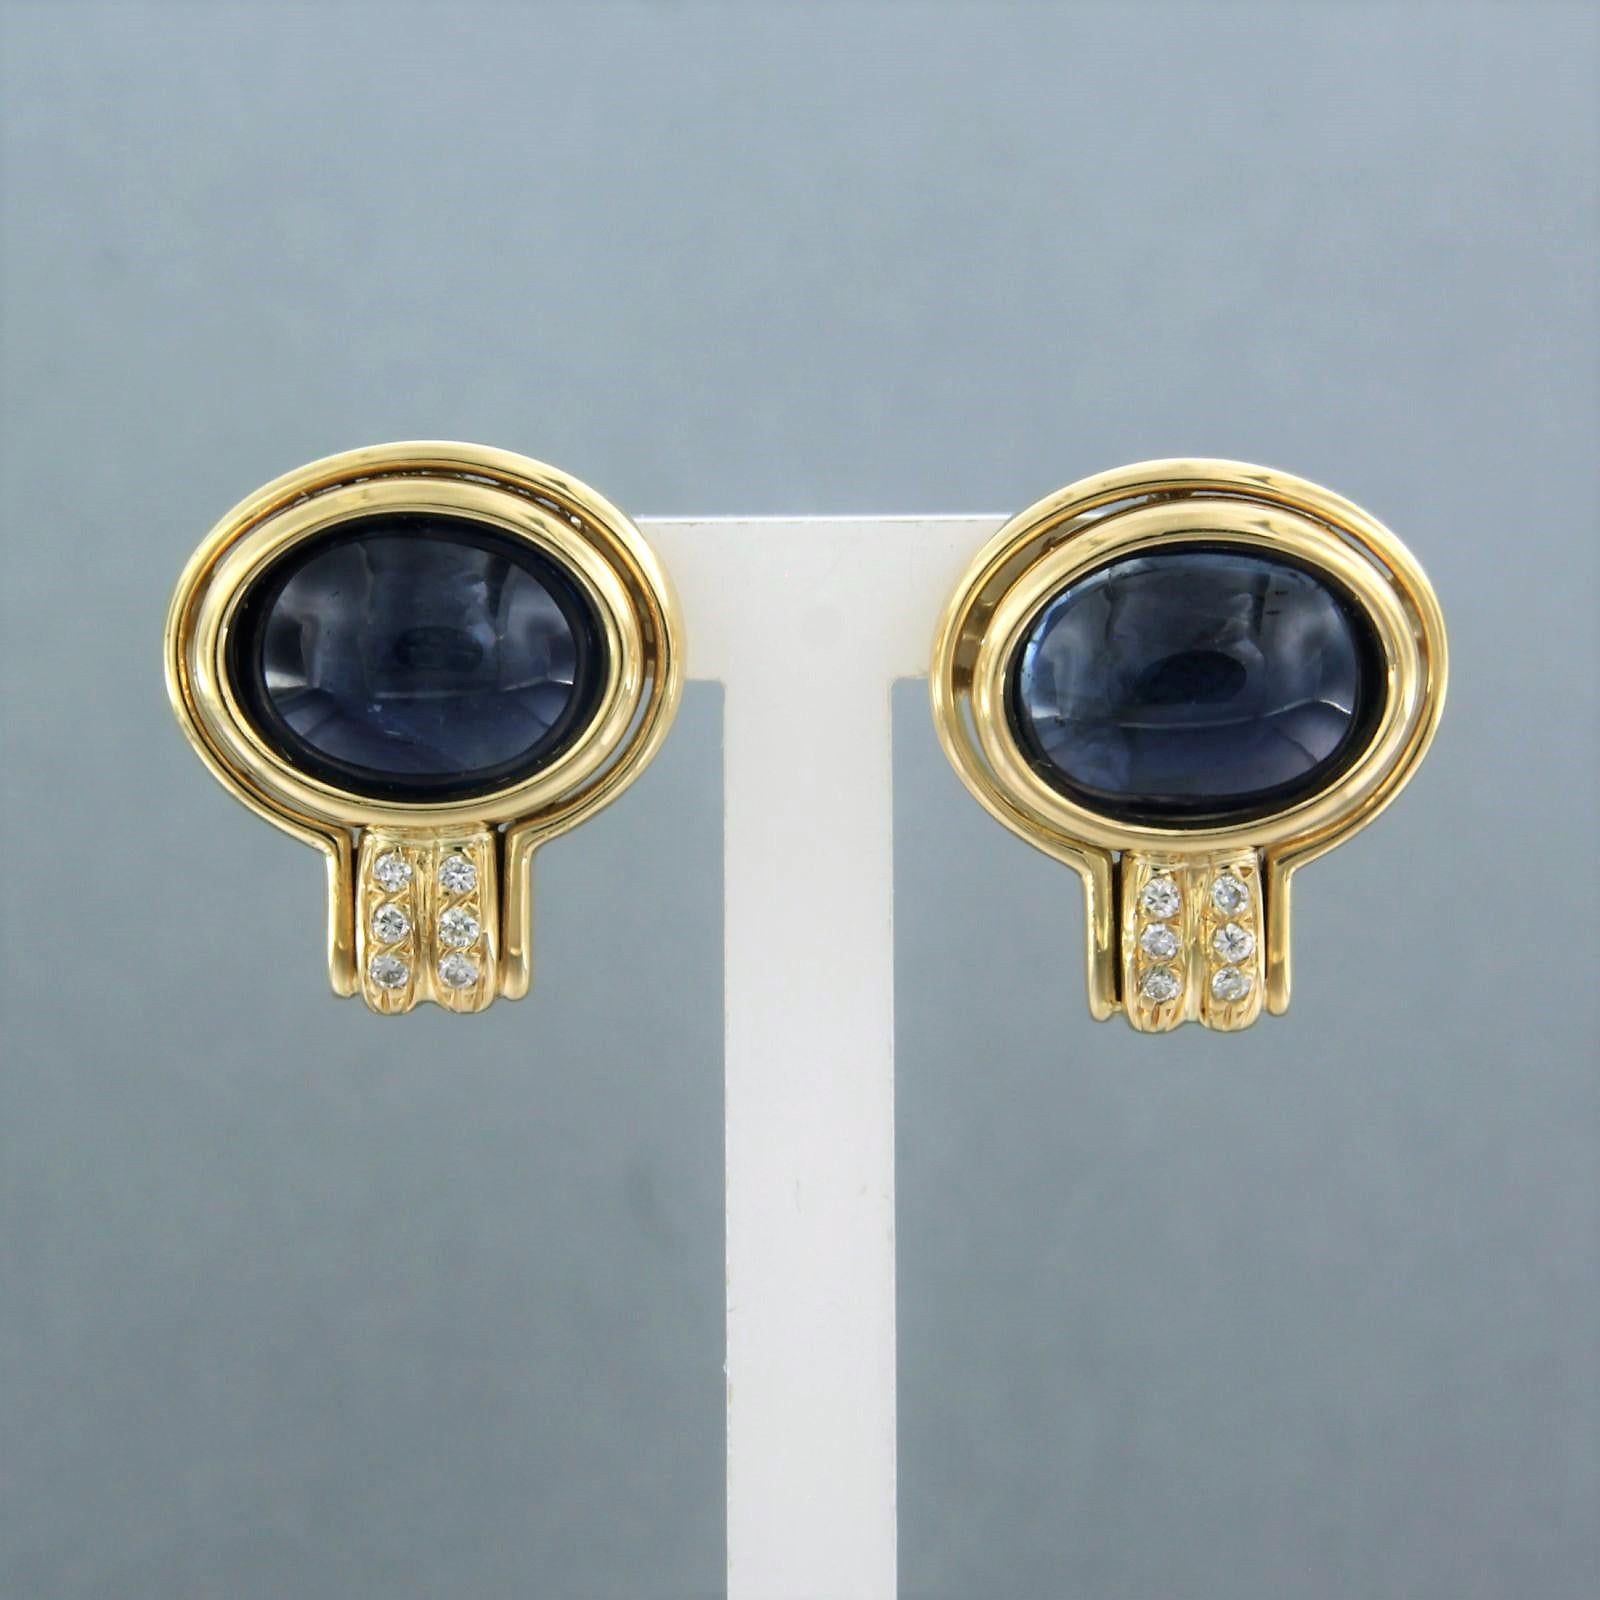 18k yellow gold stud earrings set with sapphire and brilliant cut diamonds. 0.12ct - F/G – VS/SI

Detailed description:

the size of the ear stud is 1.7 cm long by 1.5 cm wide

Total weight 10.4 grams

set with

- 2 x 1.0 cm x 7.6 mm oval cabachon